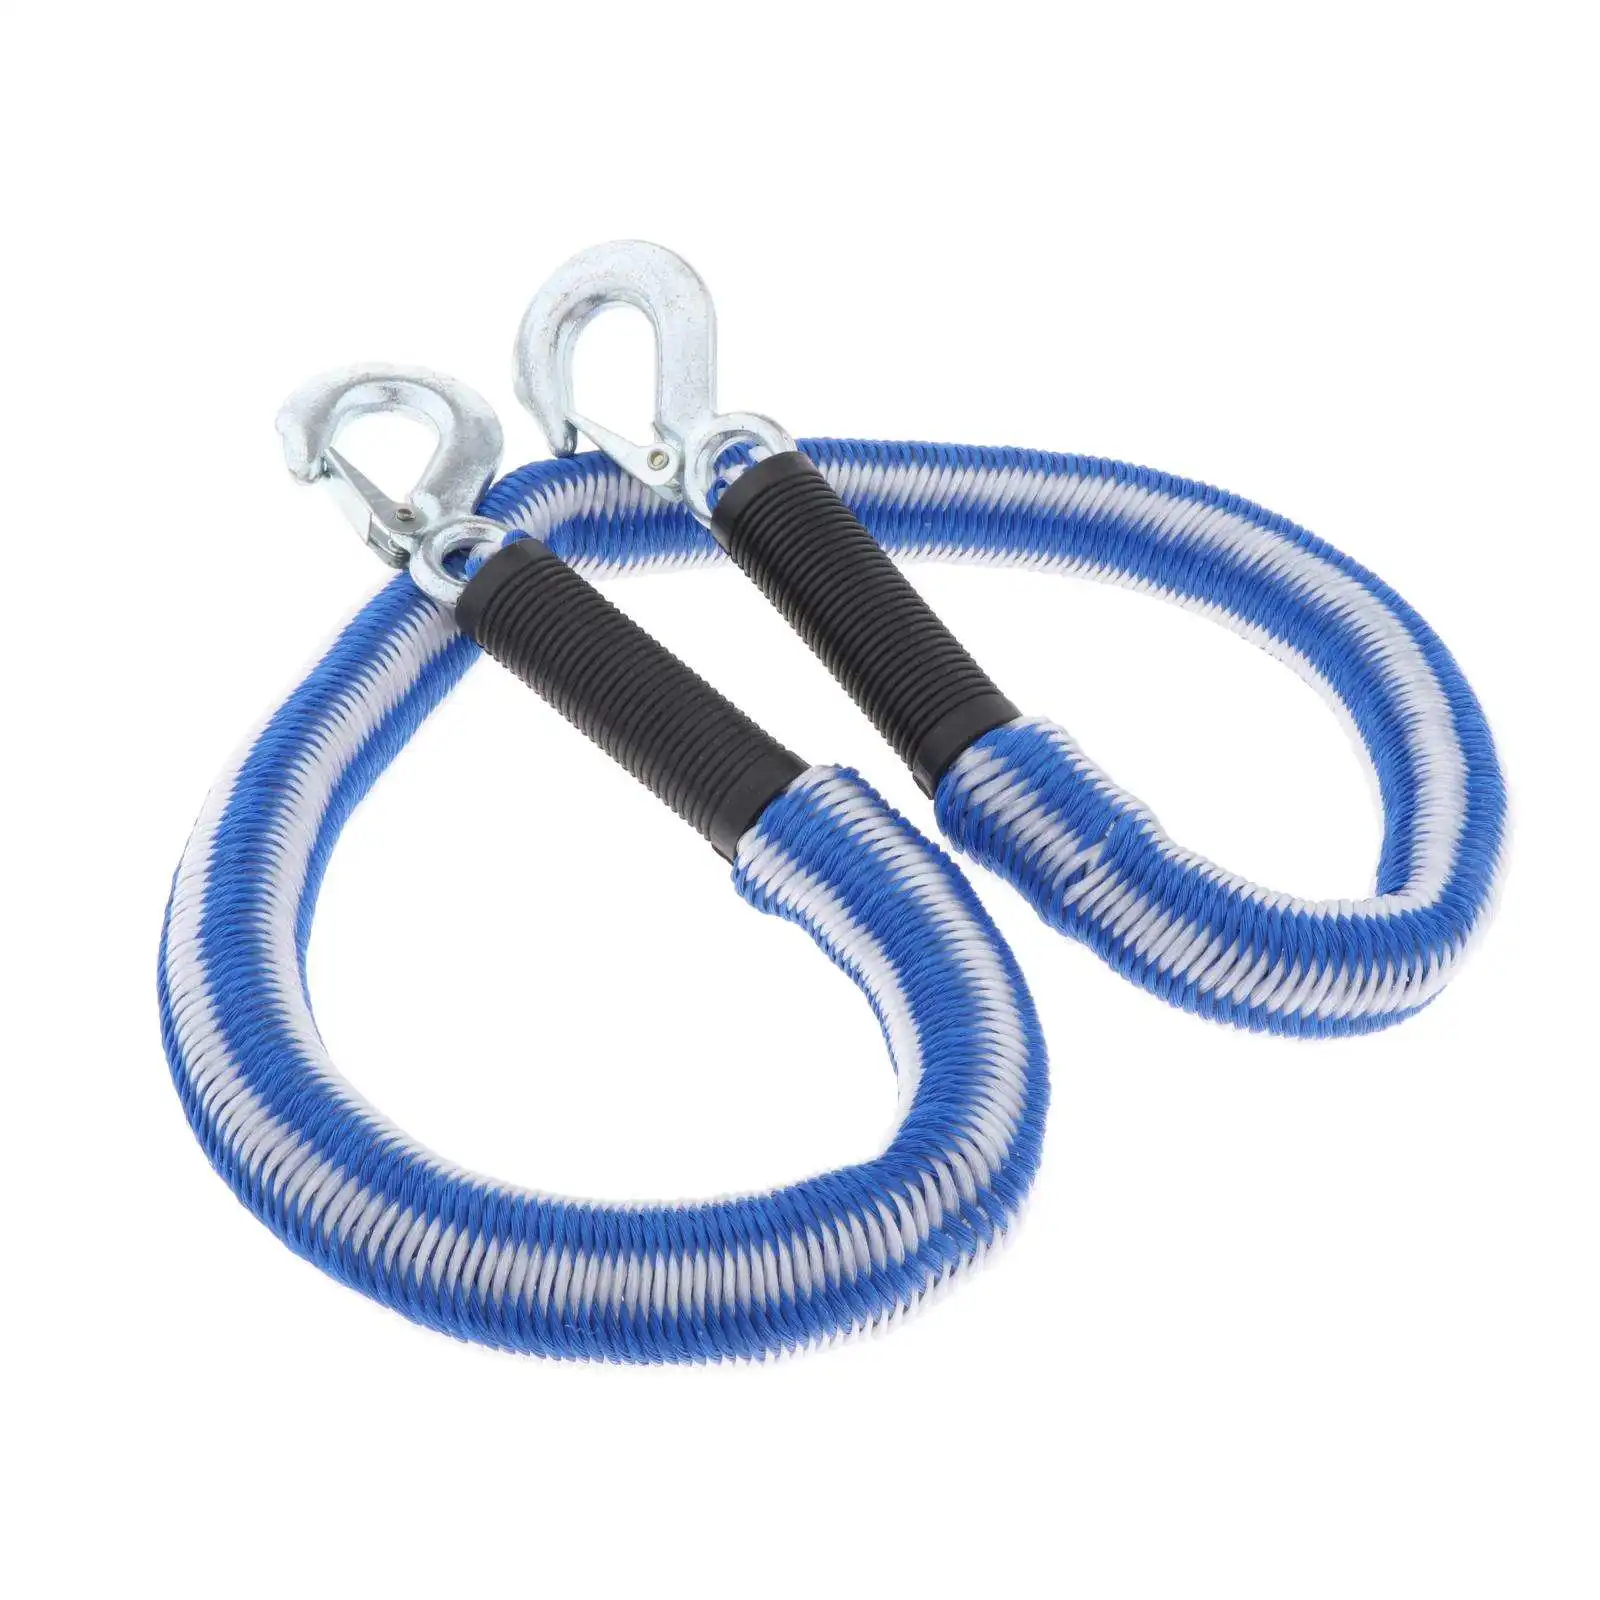 1 Ton Car Towing Rope Recovery Tow Strap with Safety Hooks 125x4cm, Easy to Install and Remove